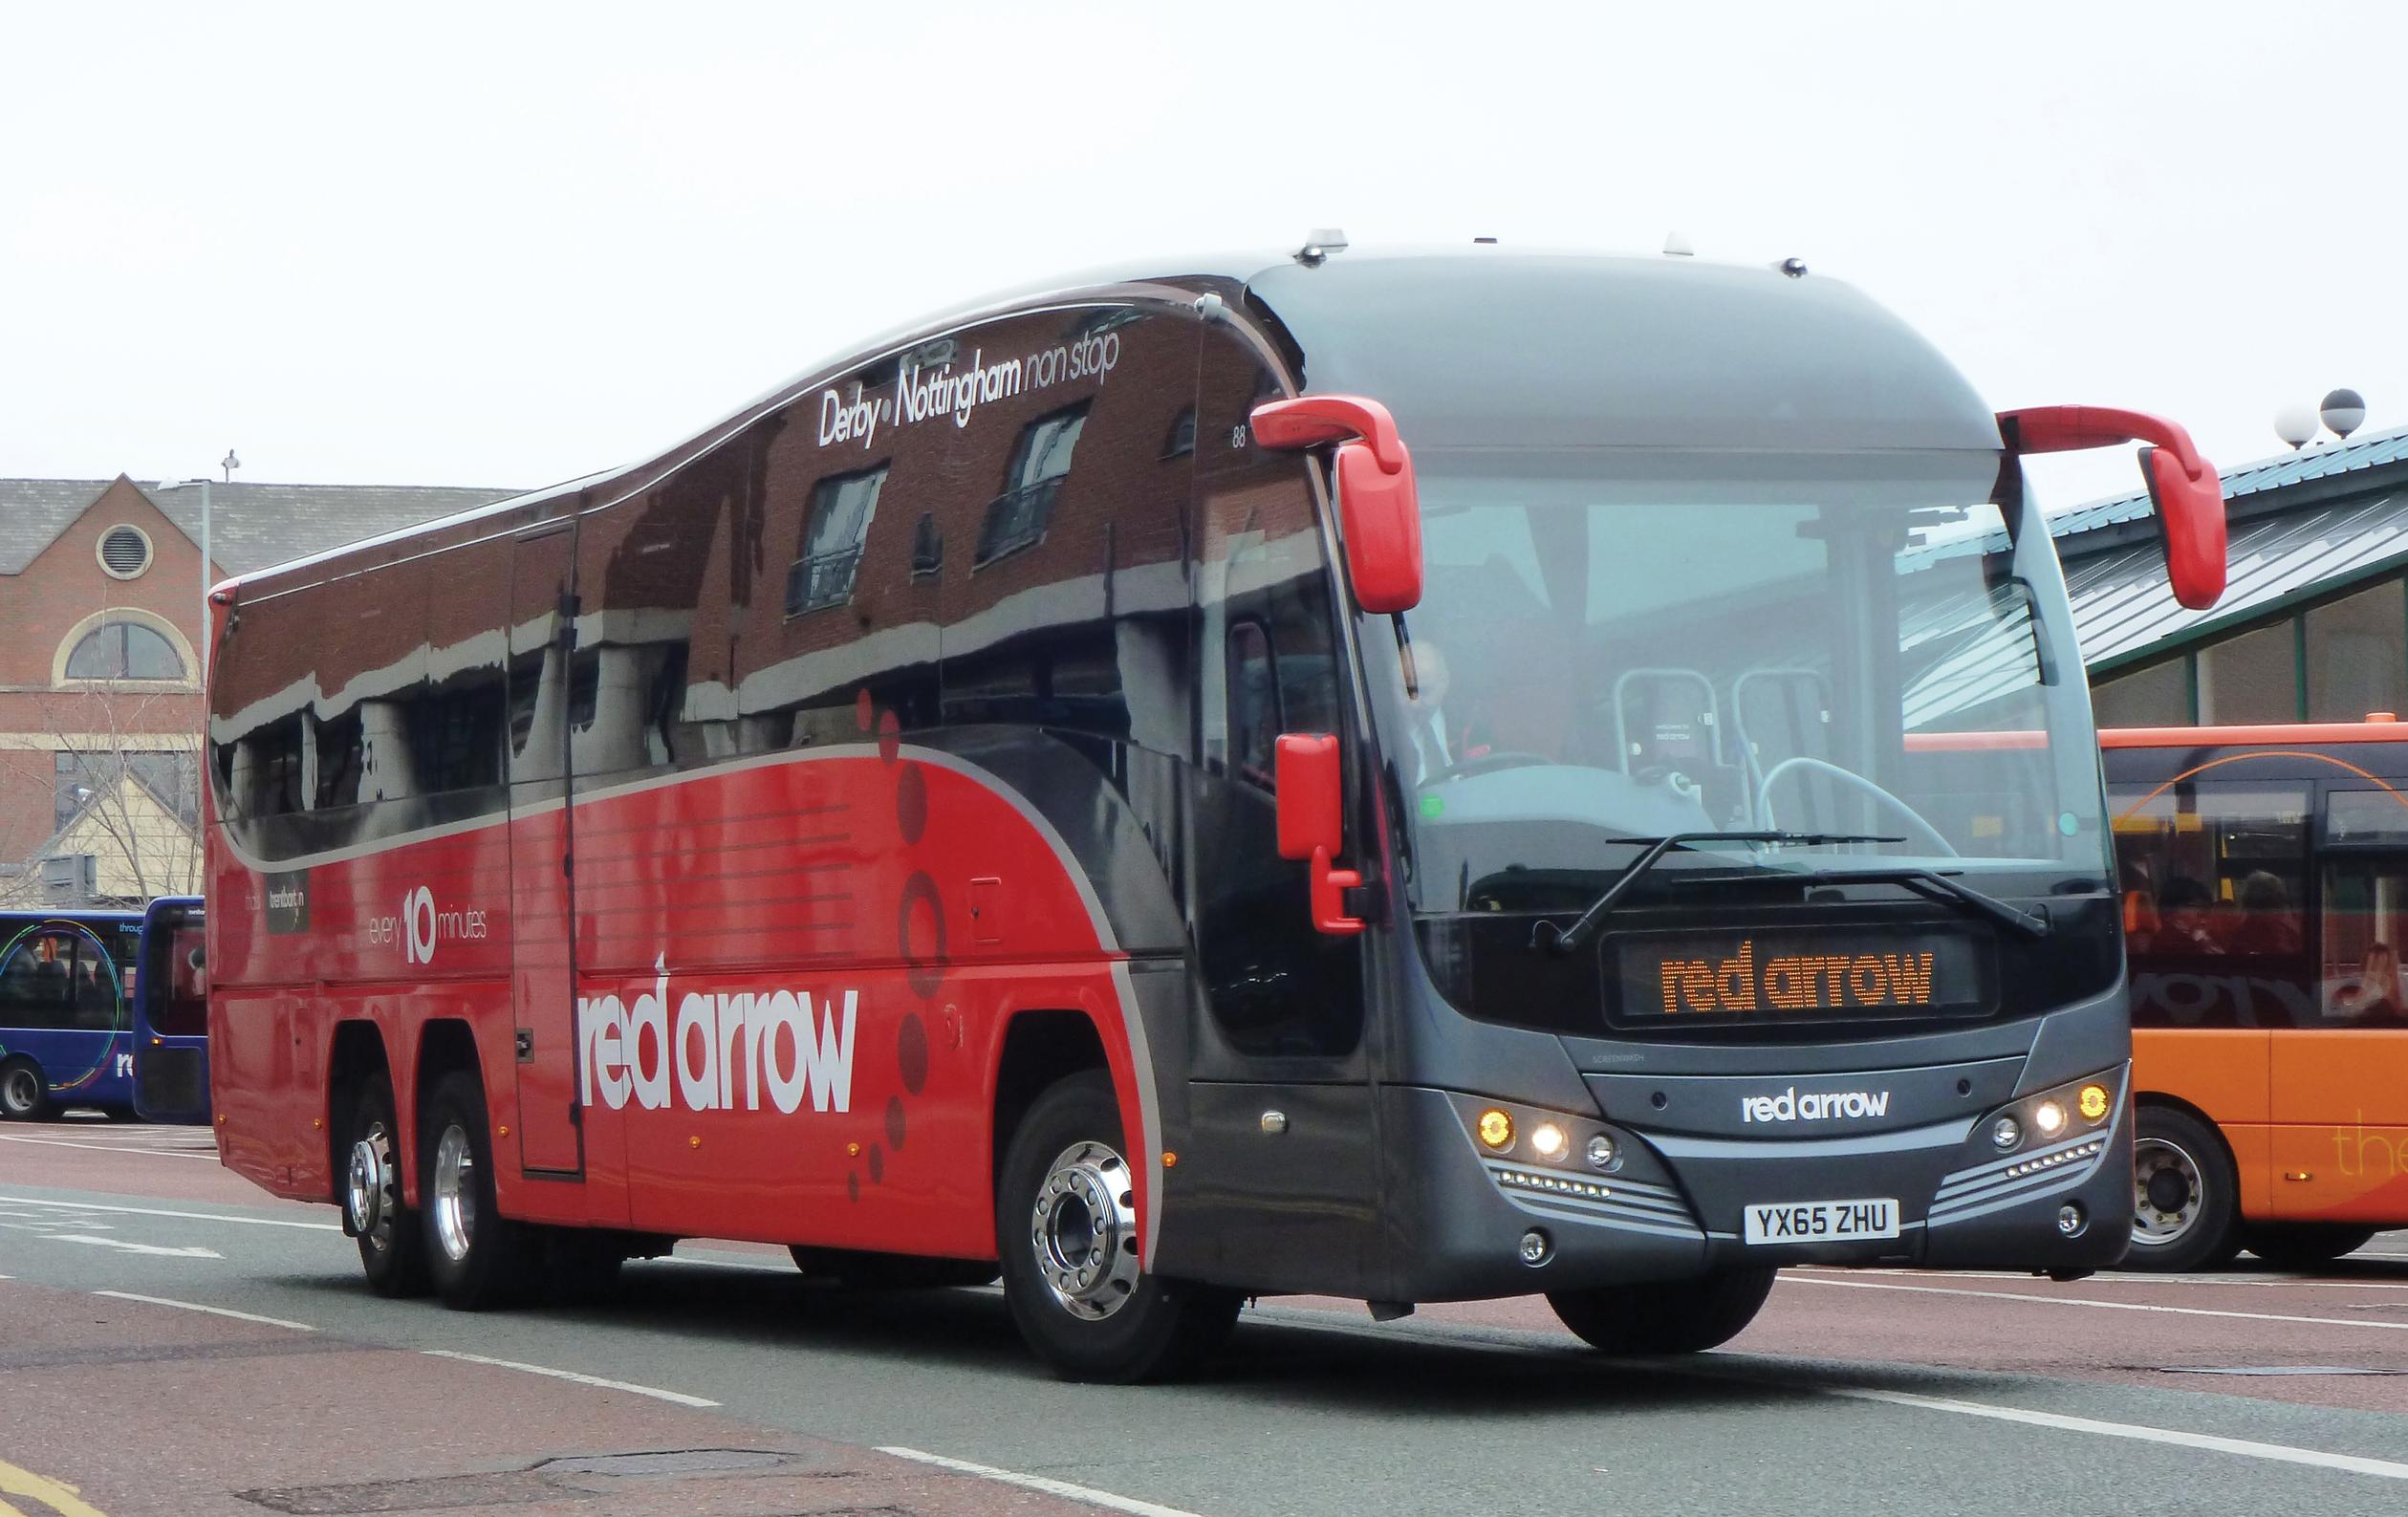 Red Arrow: Trentbarton says its takings have risen since Nottingham banned concessionary travel last year